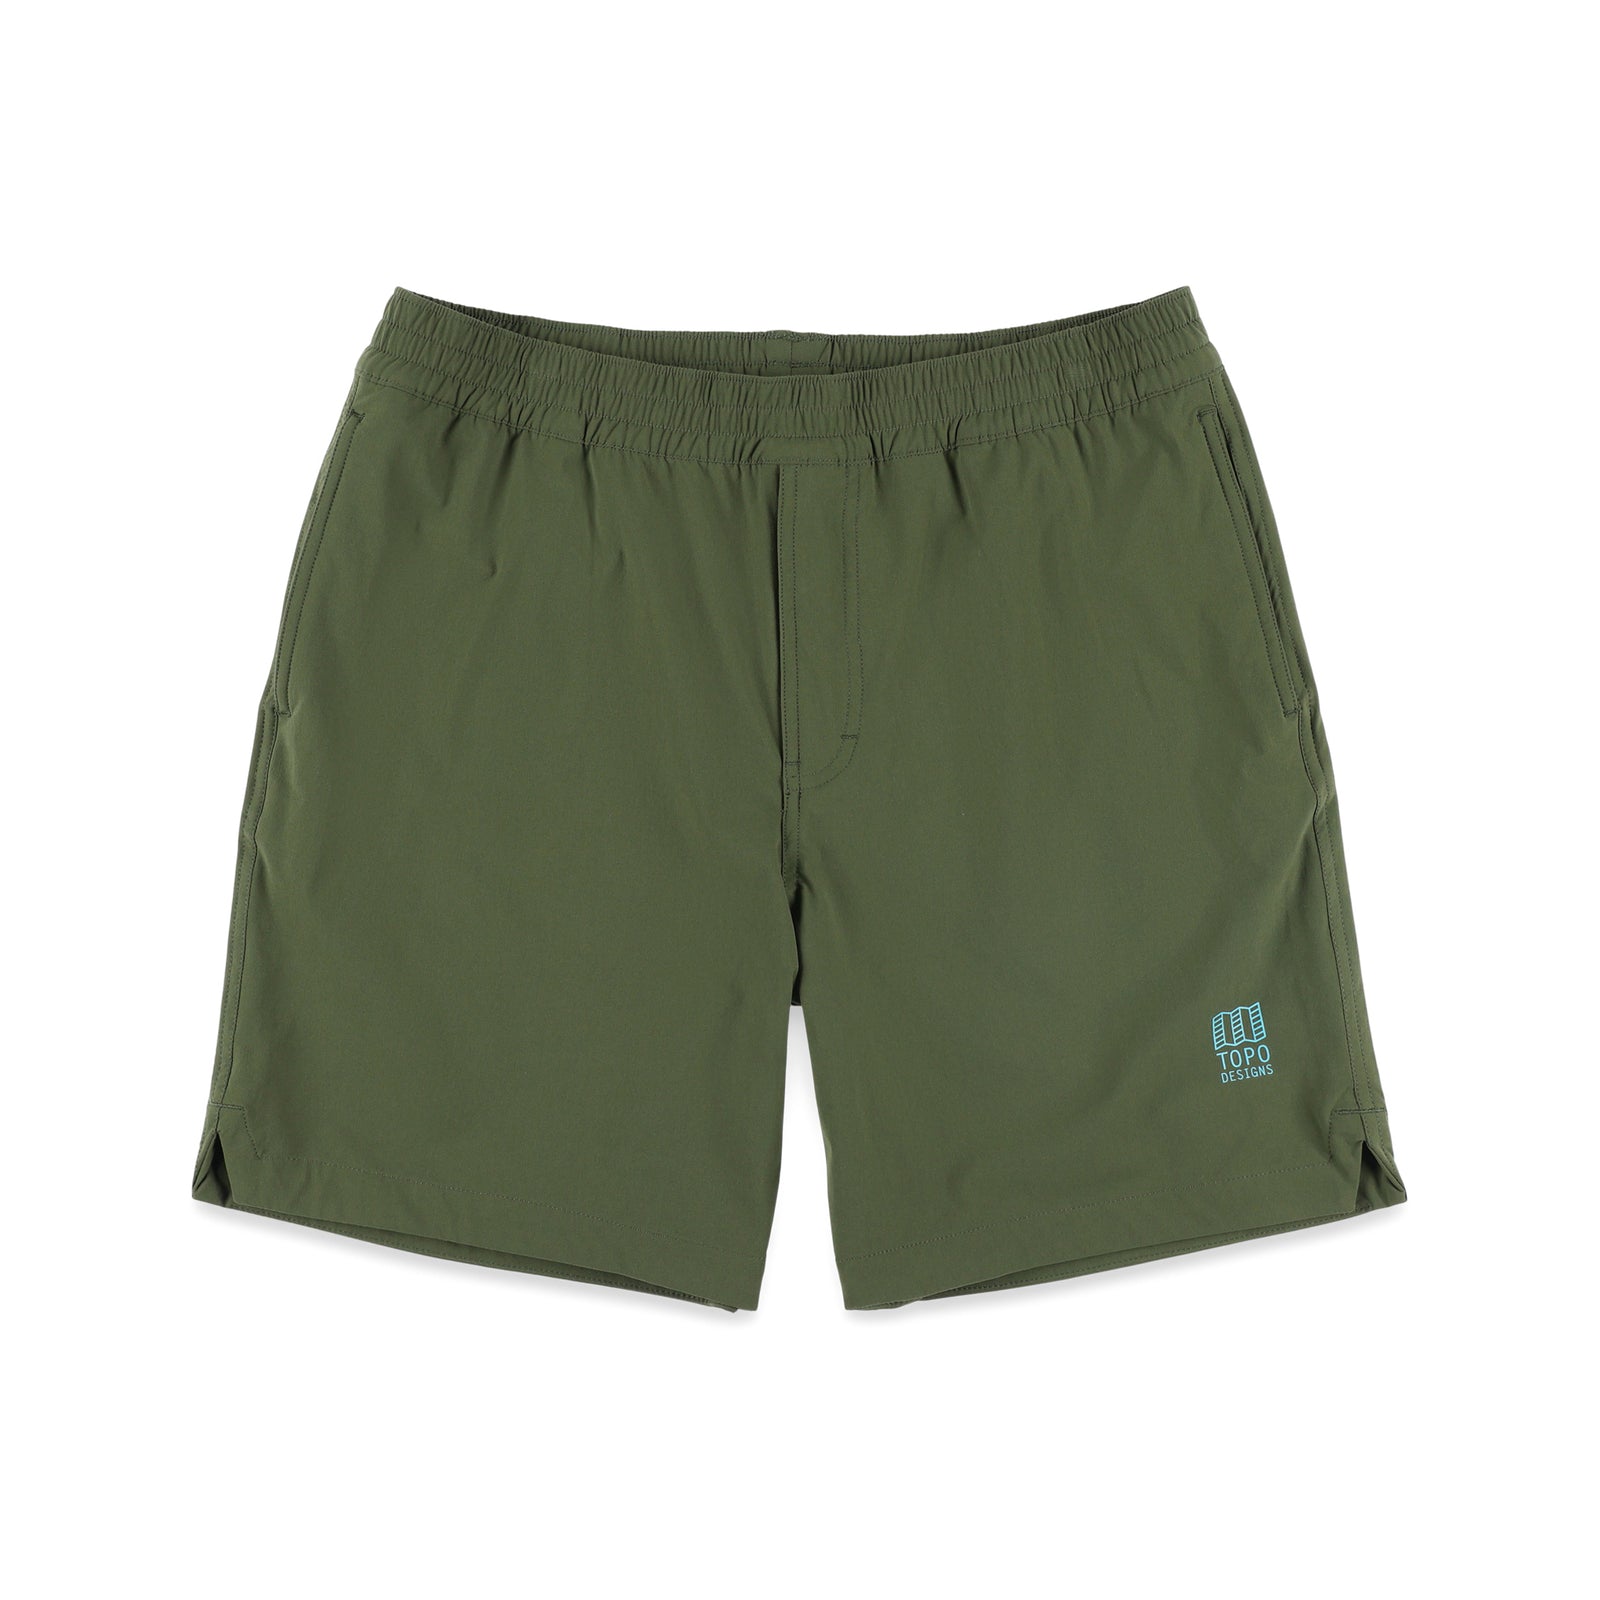 Topo Designs Men's Global lightweight quick dry travel Shorts in "Olive" green.